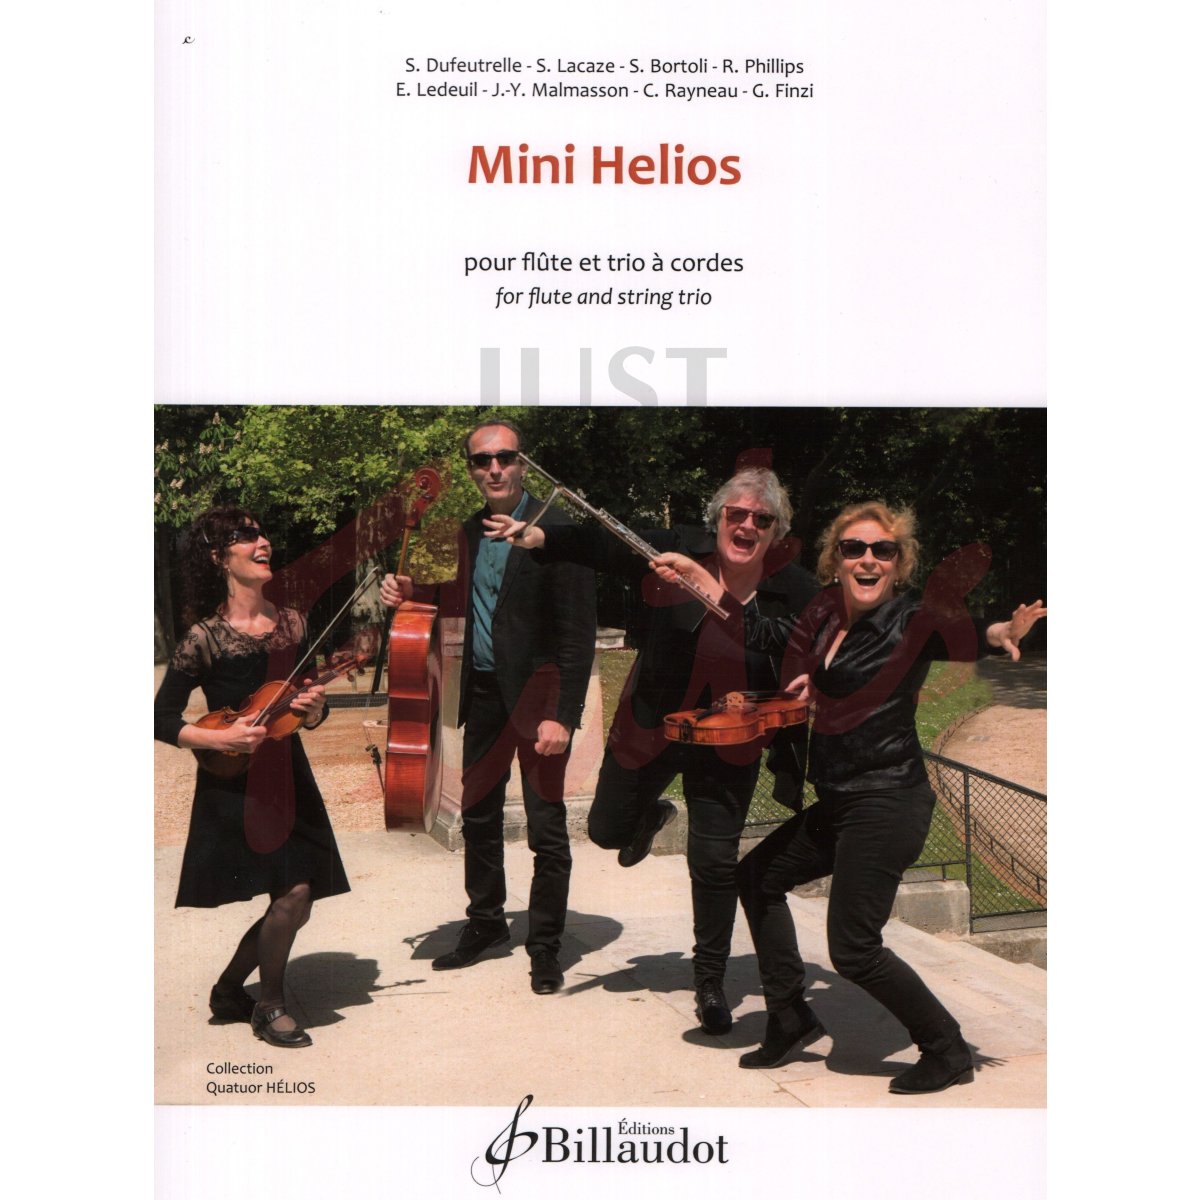 Mini Helios for Flute and String Trio